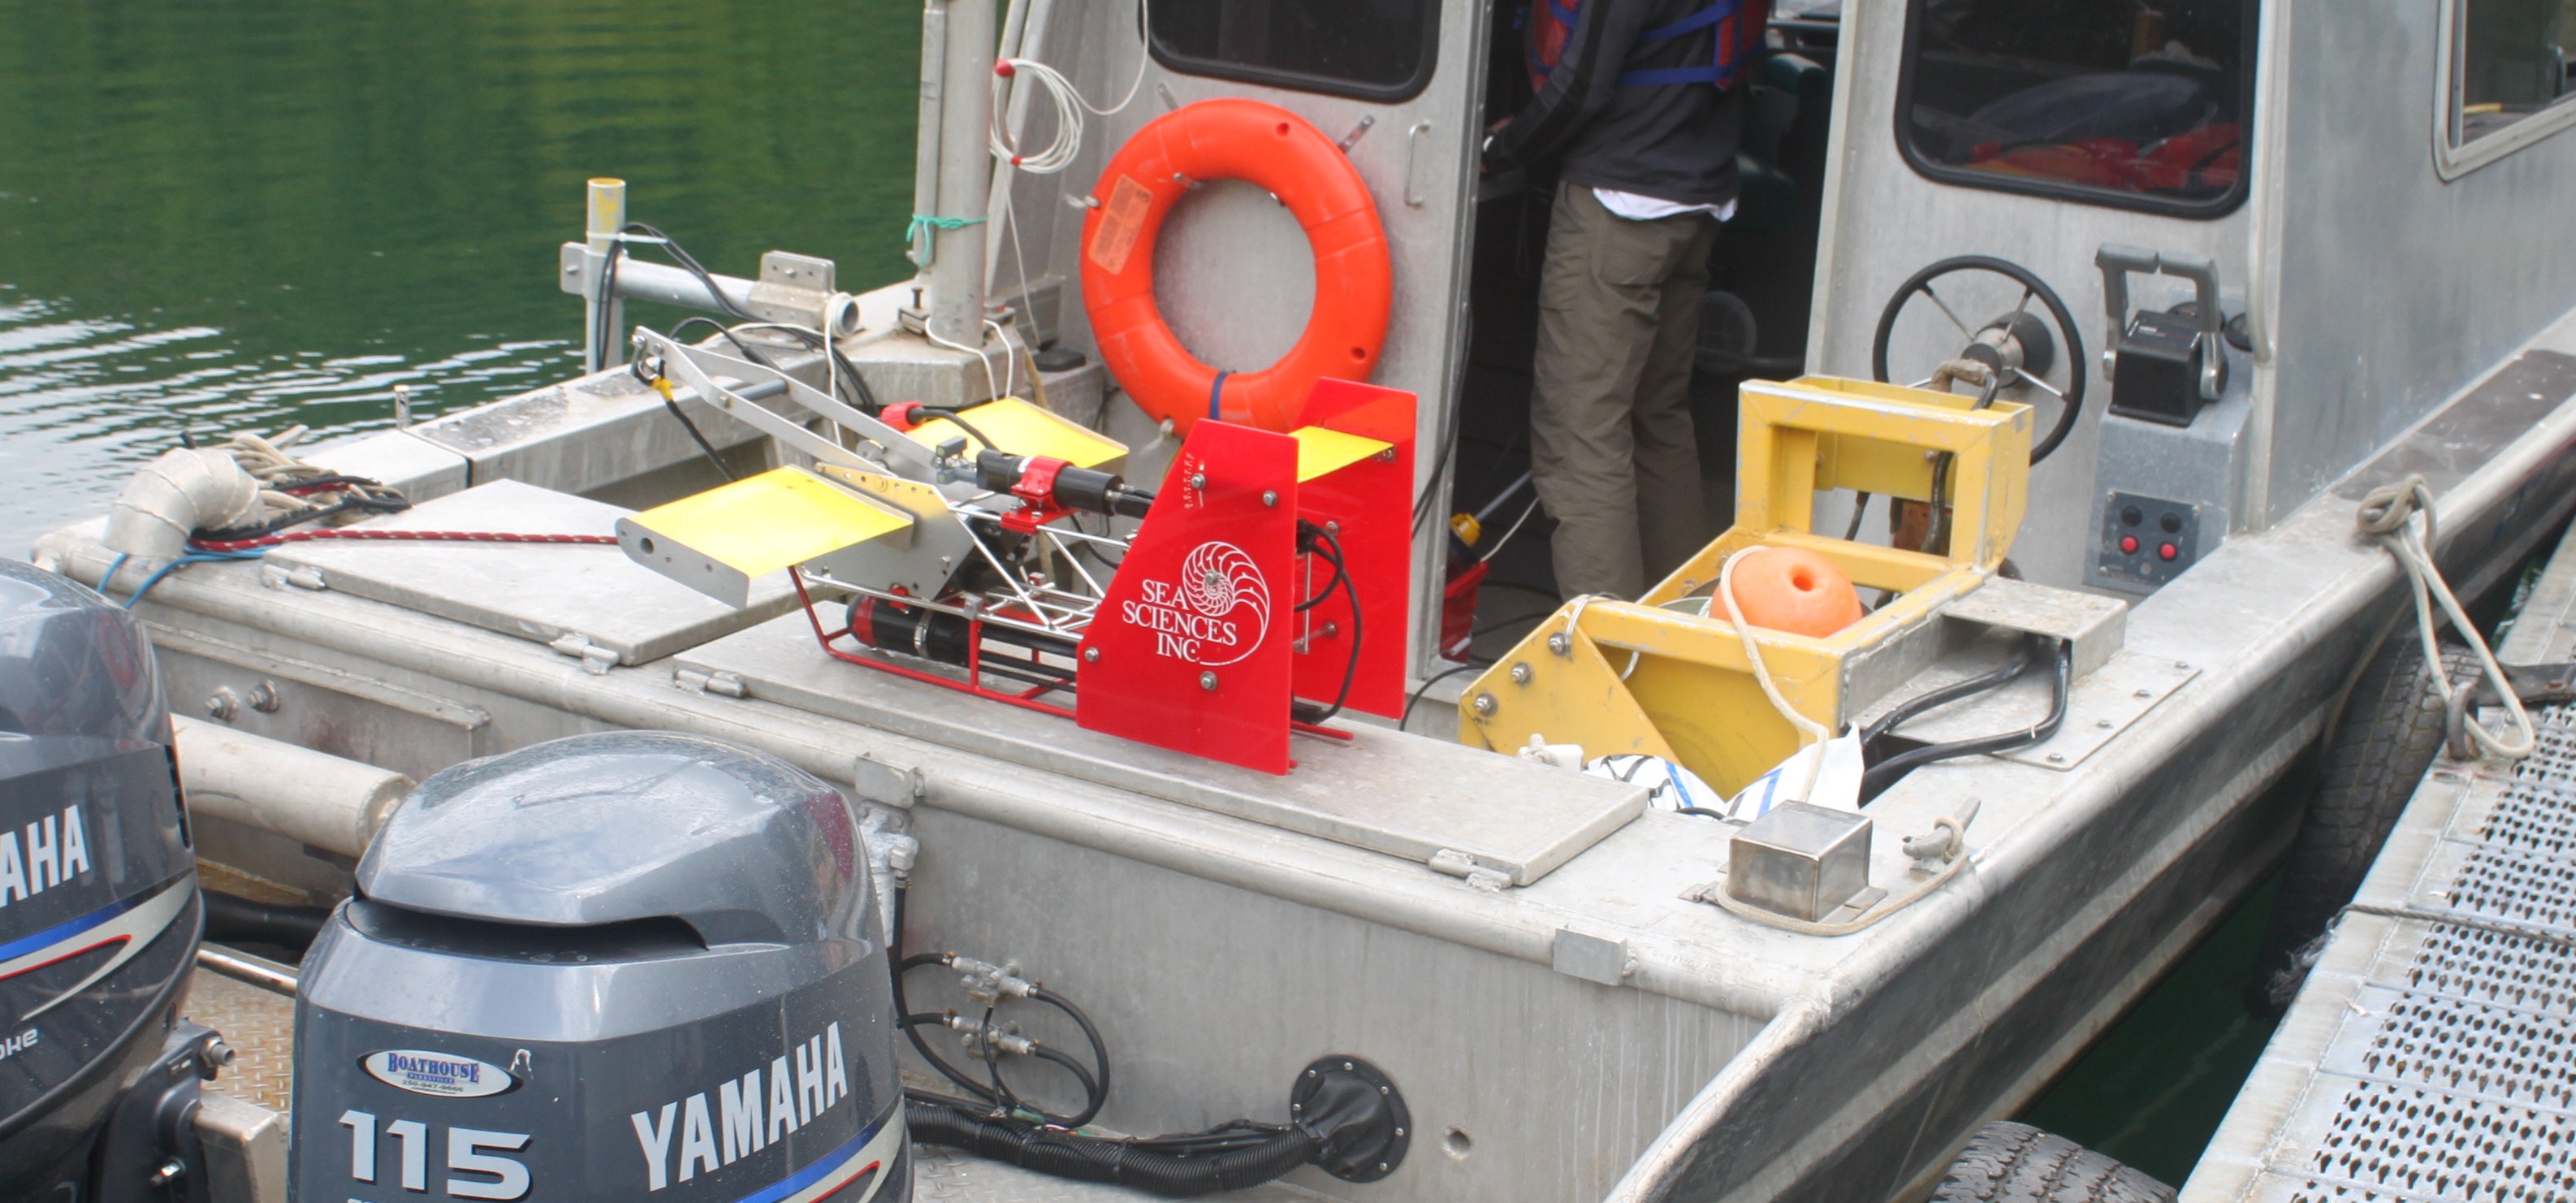 The Acrobat undulating sensor vehicle used in the search for organic particle fish waste plumes